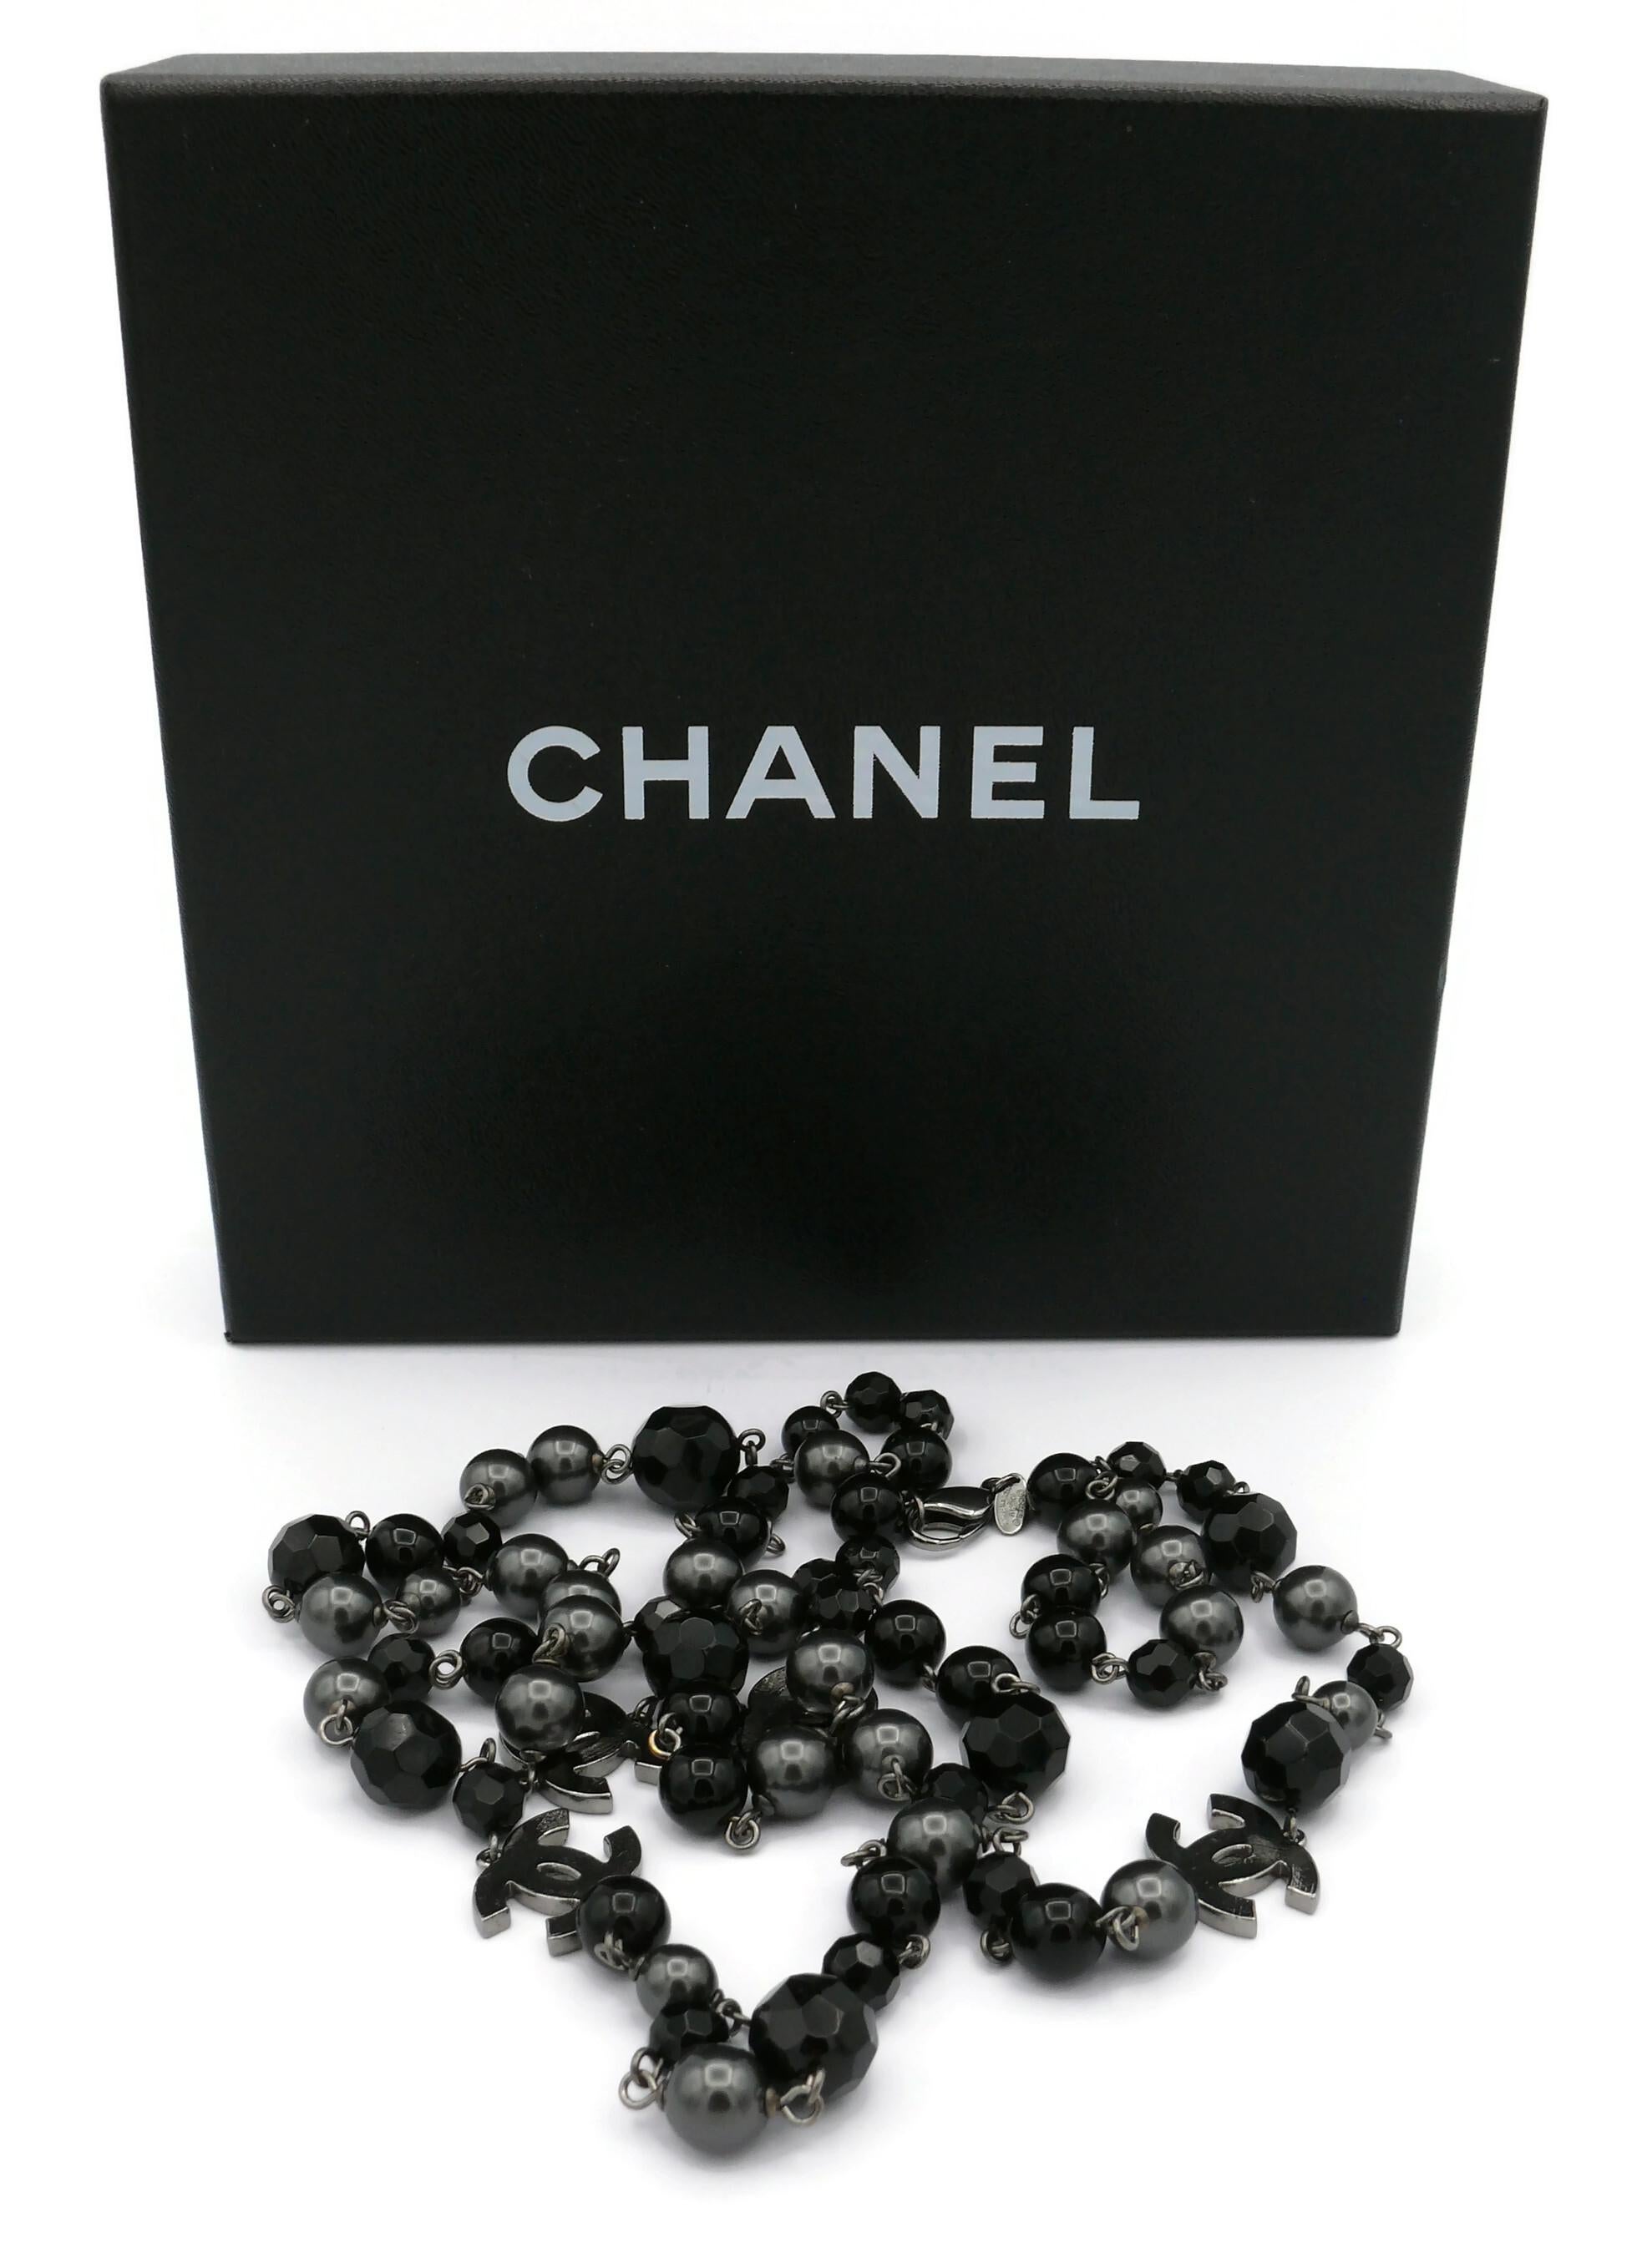 CHANEL by KARL LAGERFELD necklace featuring a strand of black beads and grey faux pearls with four silver tone textured CHANEL CC logos.

This necklace can be wrapped two times around the neck.

Lobster clasp closure.

Embossed CHANEL 10 V  Made